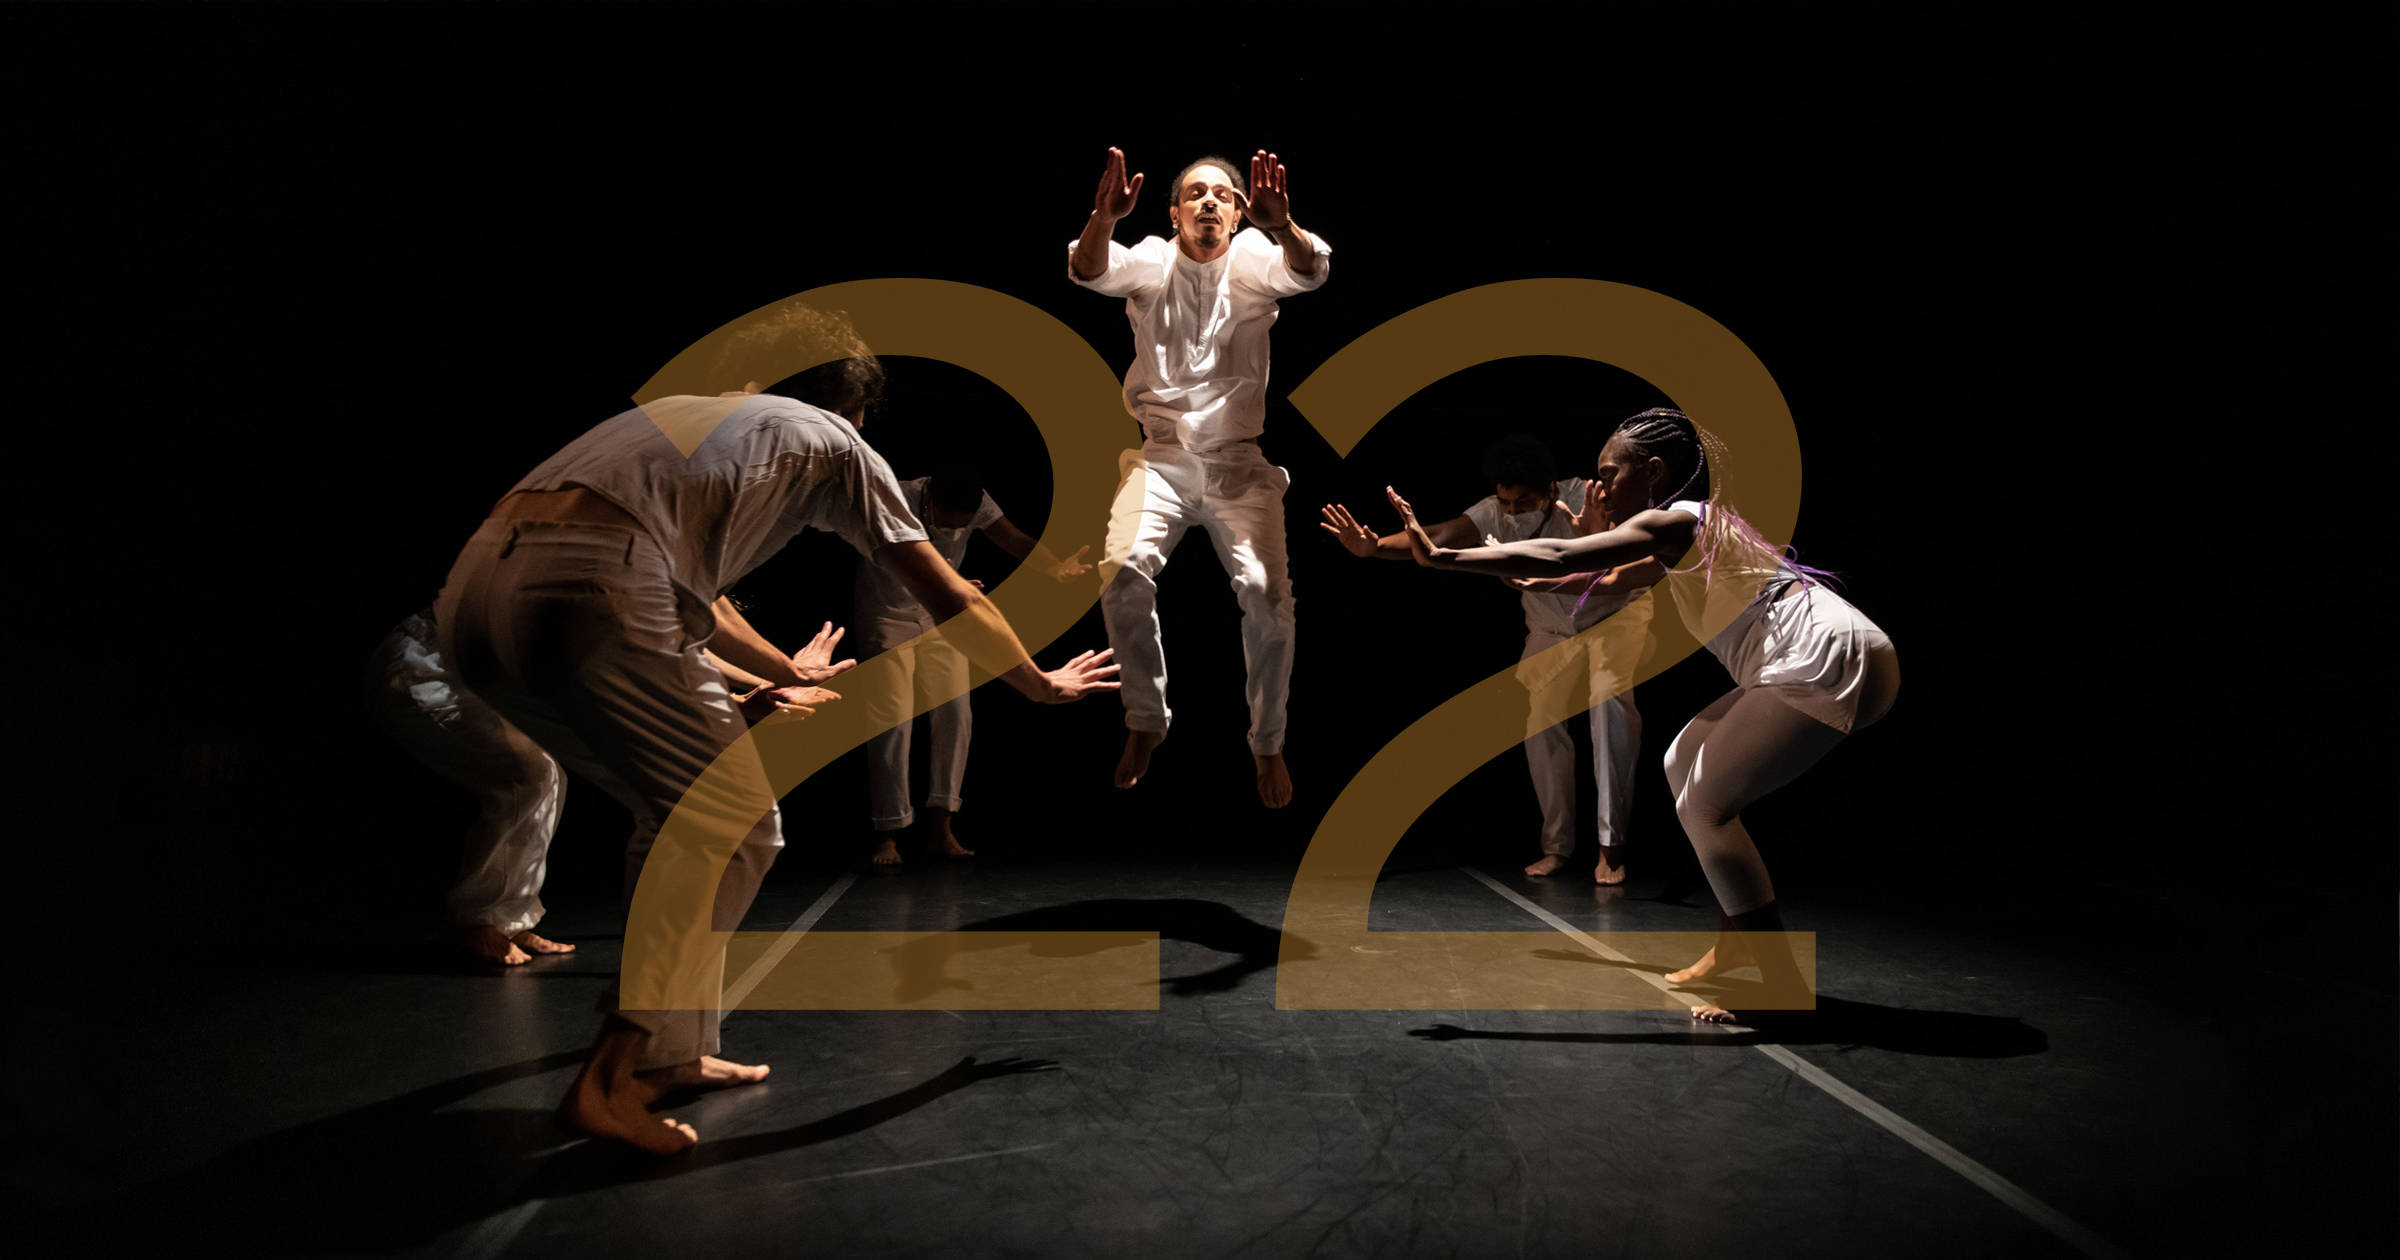 Union PDX - Festival:21 artist Rejoice! Diaspora Dance Theater performing a ring shout during their work 'Who We Carry' at the Hampton Opera Center in Portland, Oregon. The number 22 overlays the image to indicate the festival year. | Photography: Jingzi Zhao